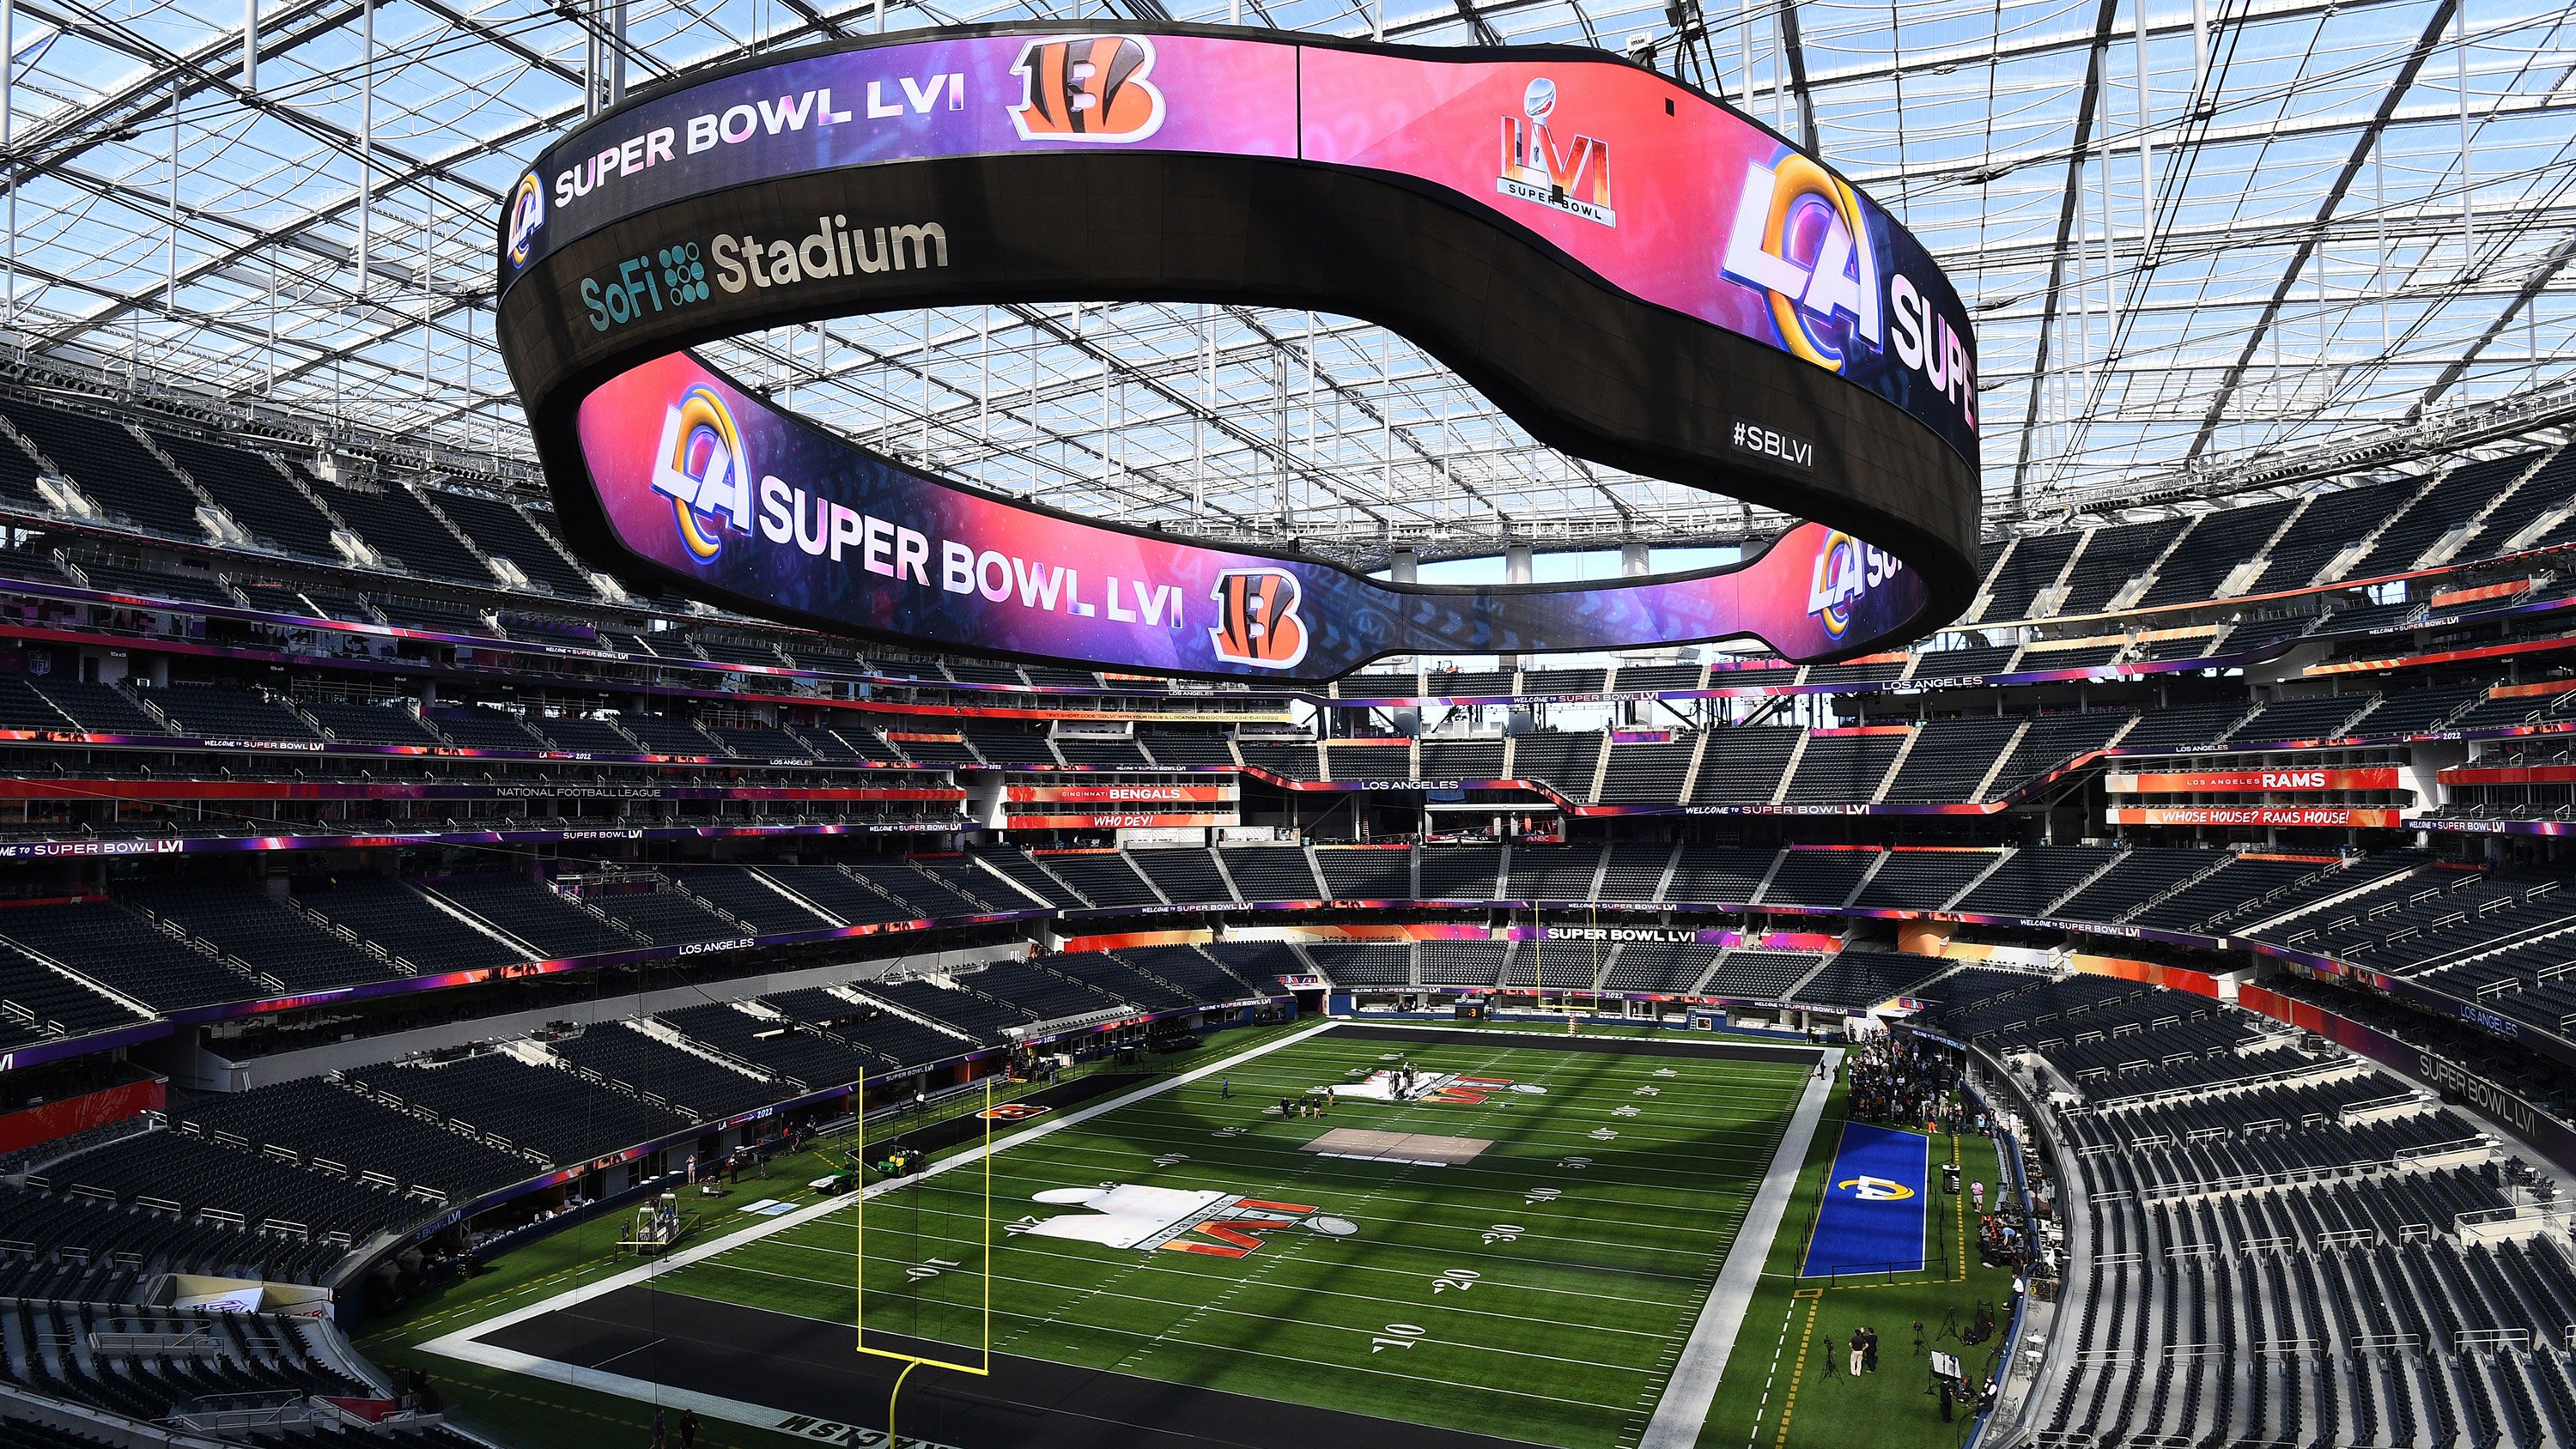 The 1,000-ton screen bringing Super Bowl LVI to the lucky fans